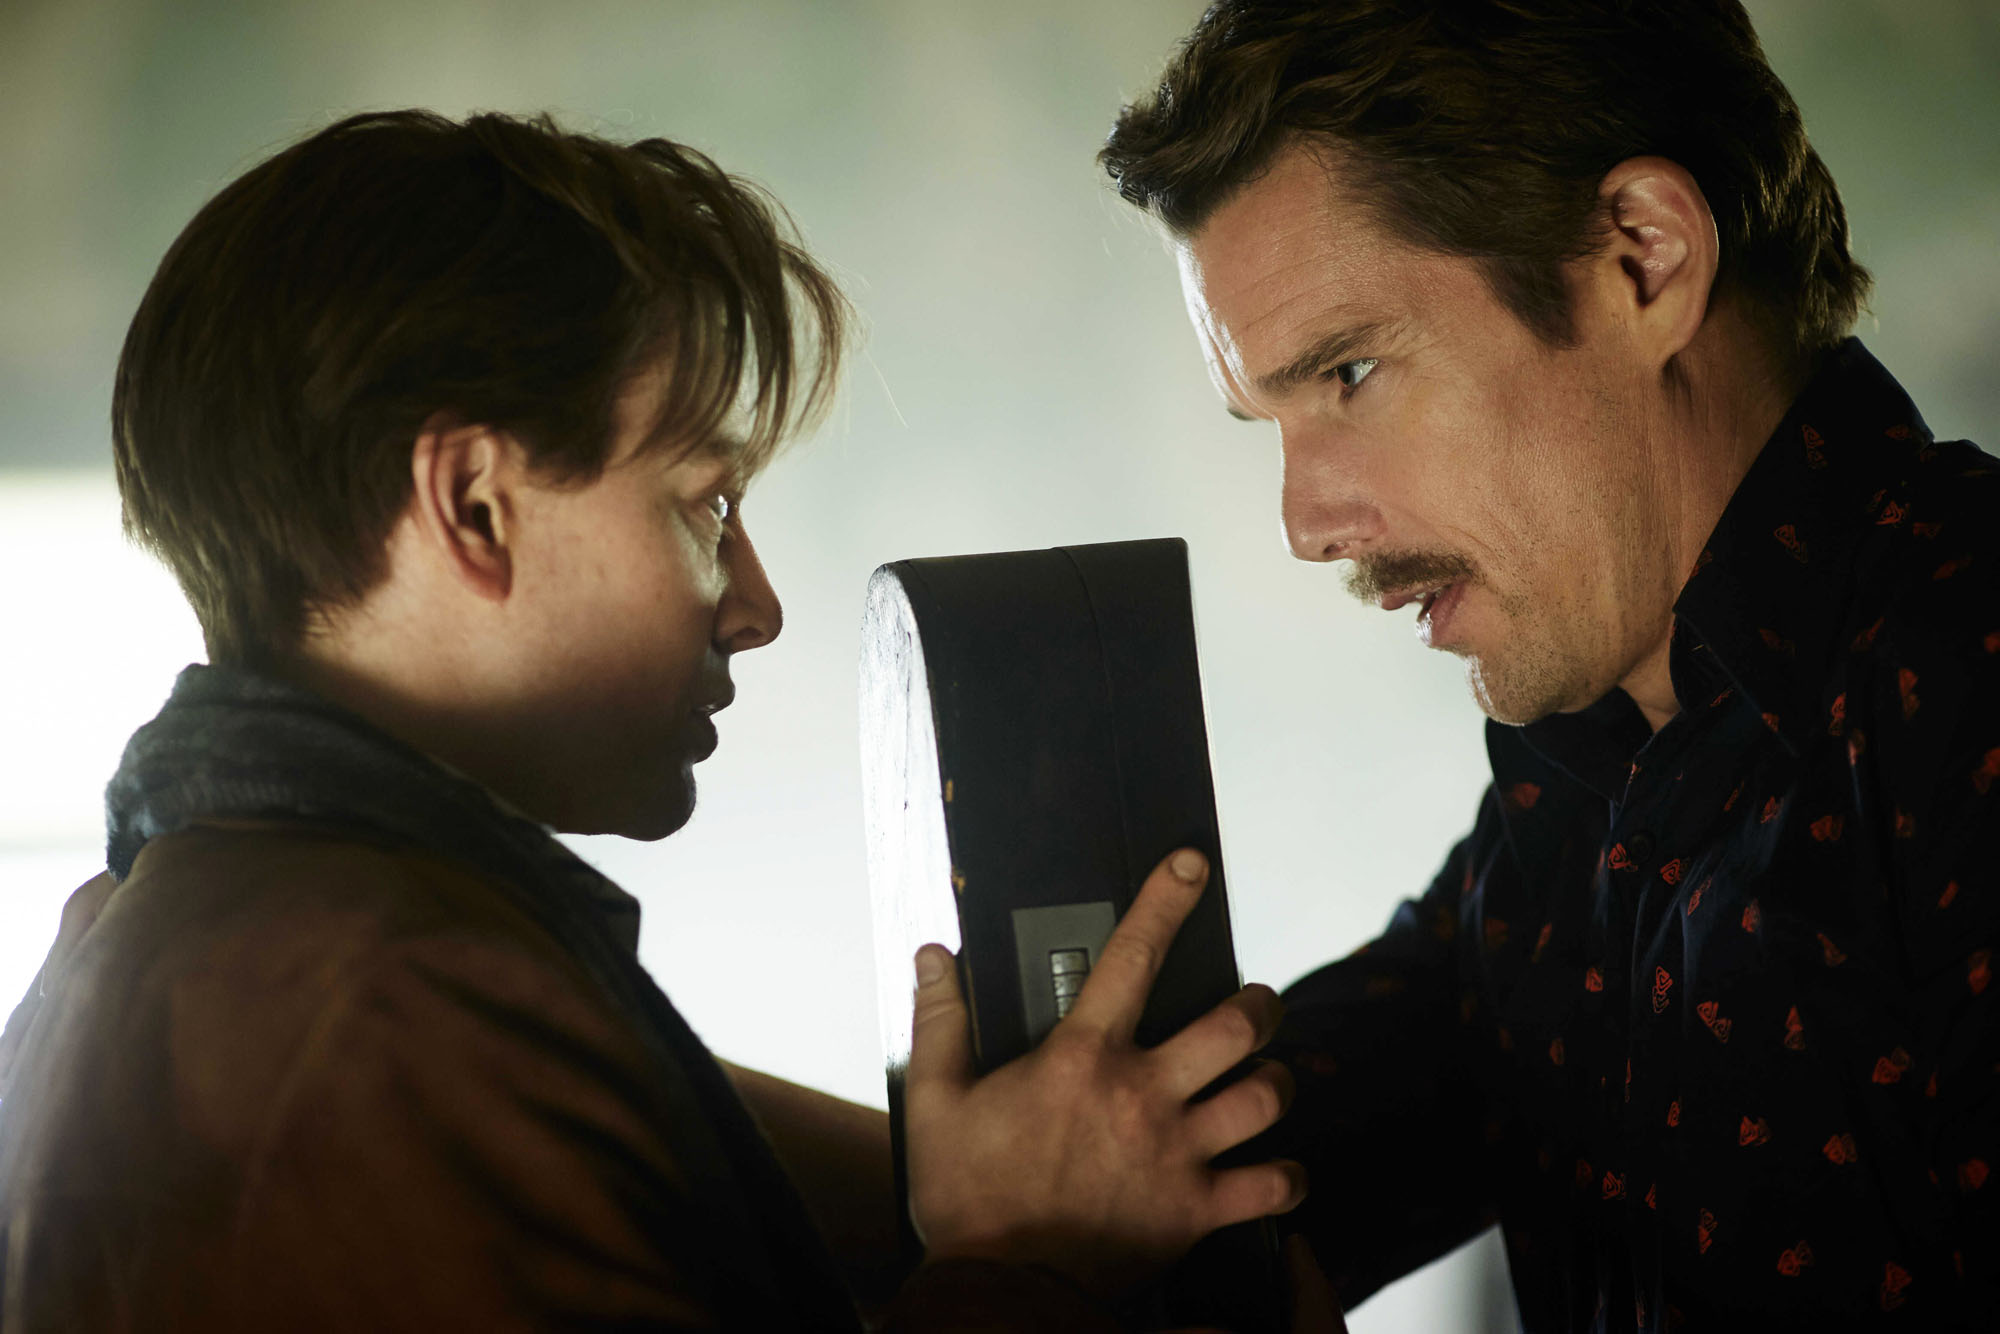 PREDESTINATION - 2015 FILM STILL - Sarah Snook and Ethan Hawke - Photo Credit: Ben King/Sony Pictures Worldwide Acquisitions